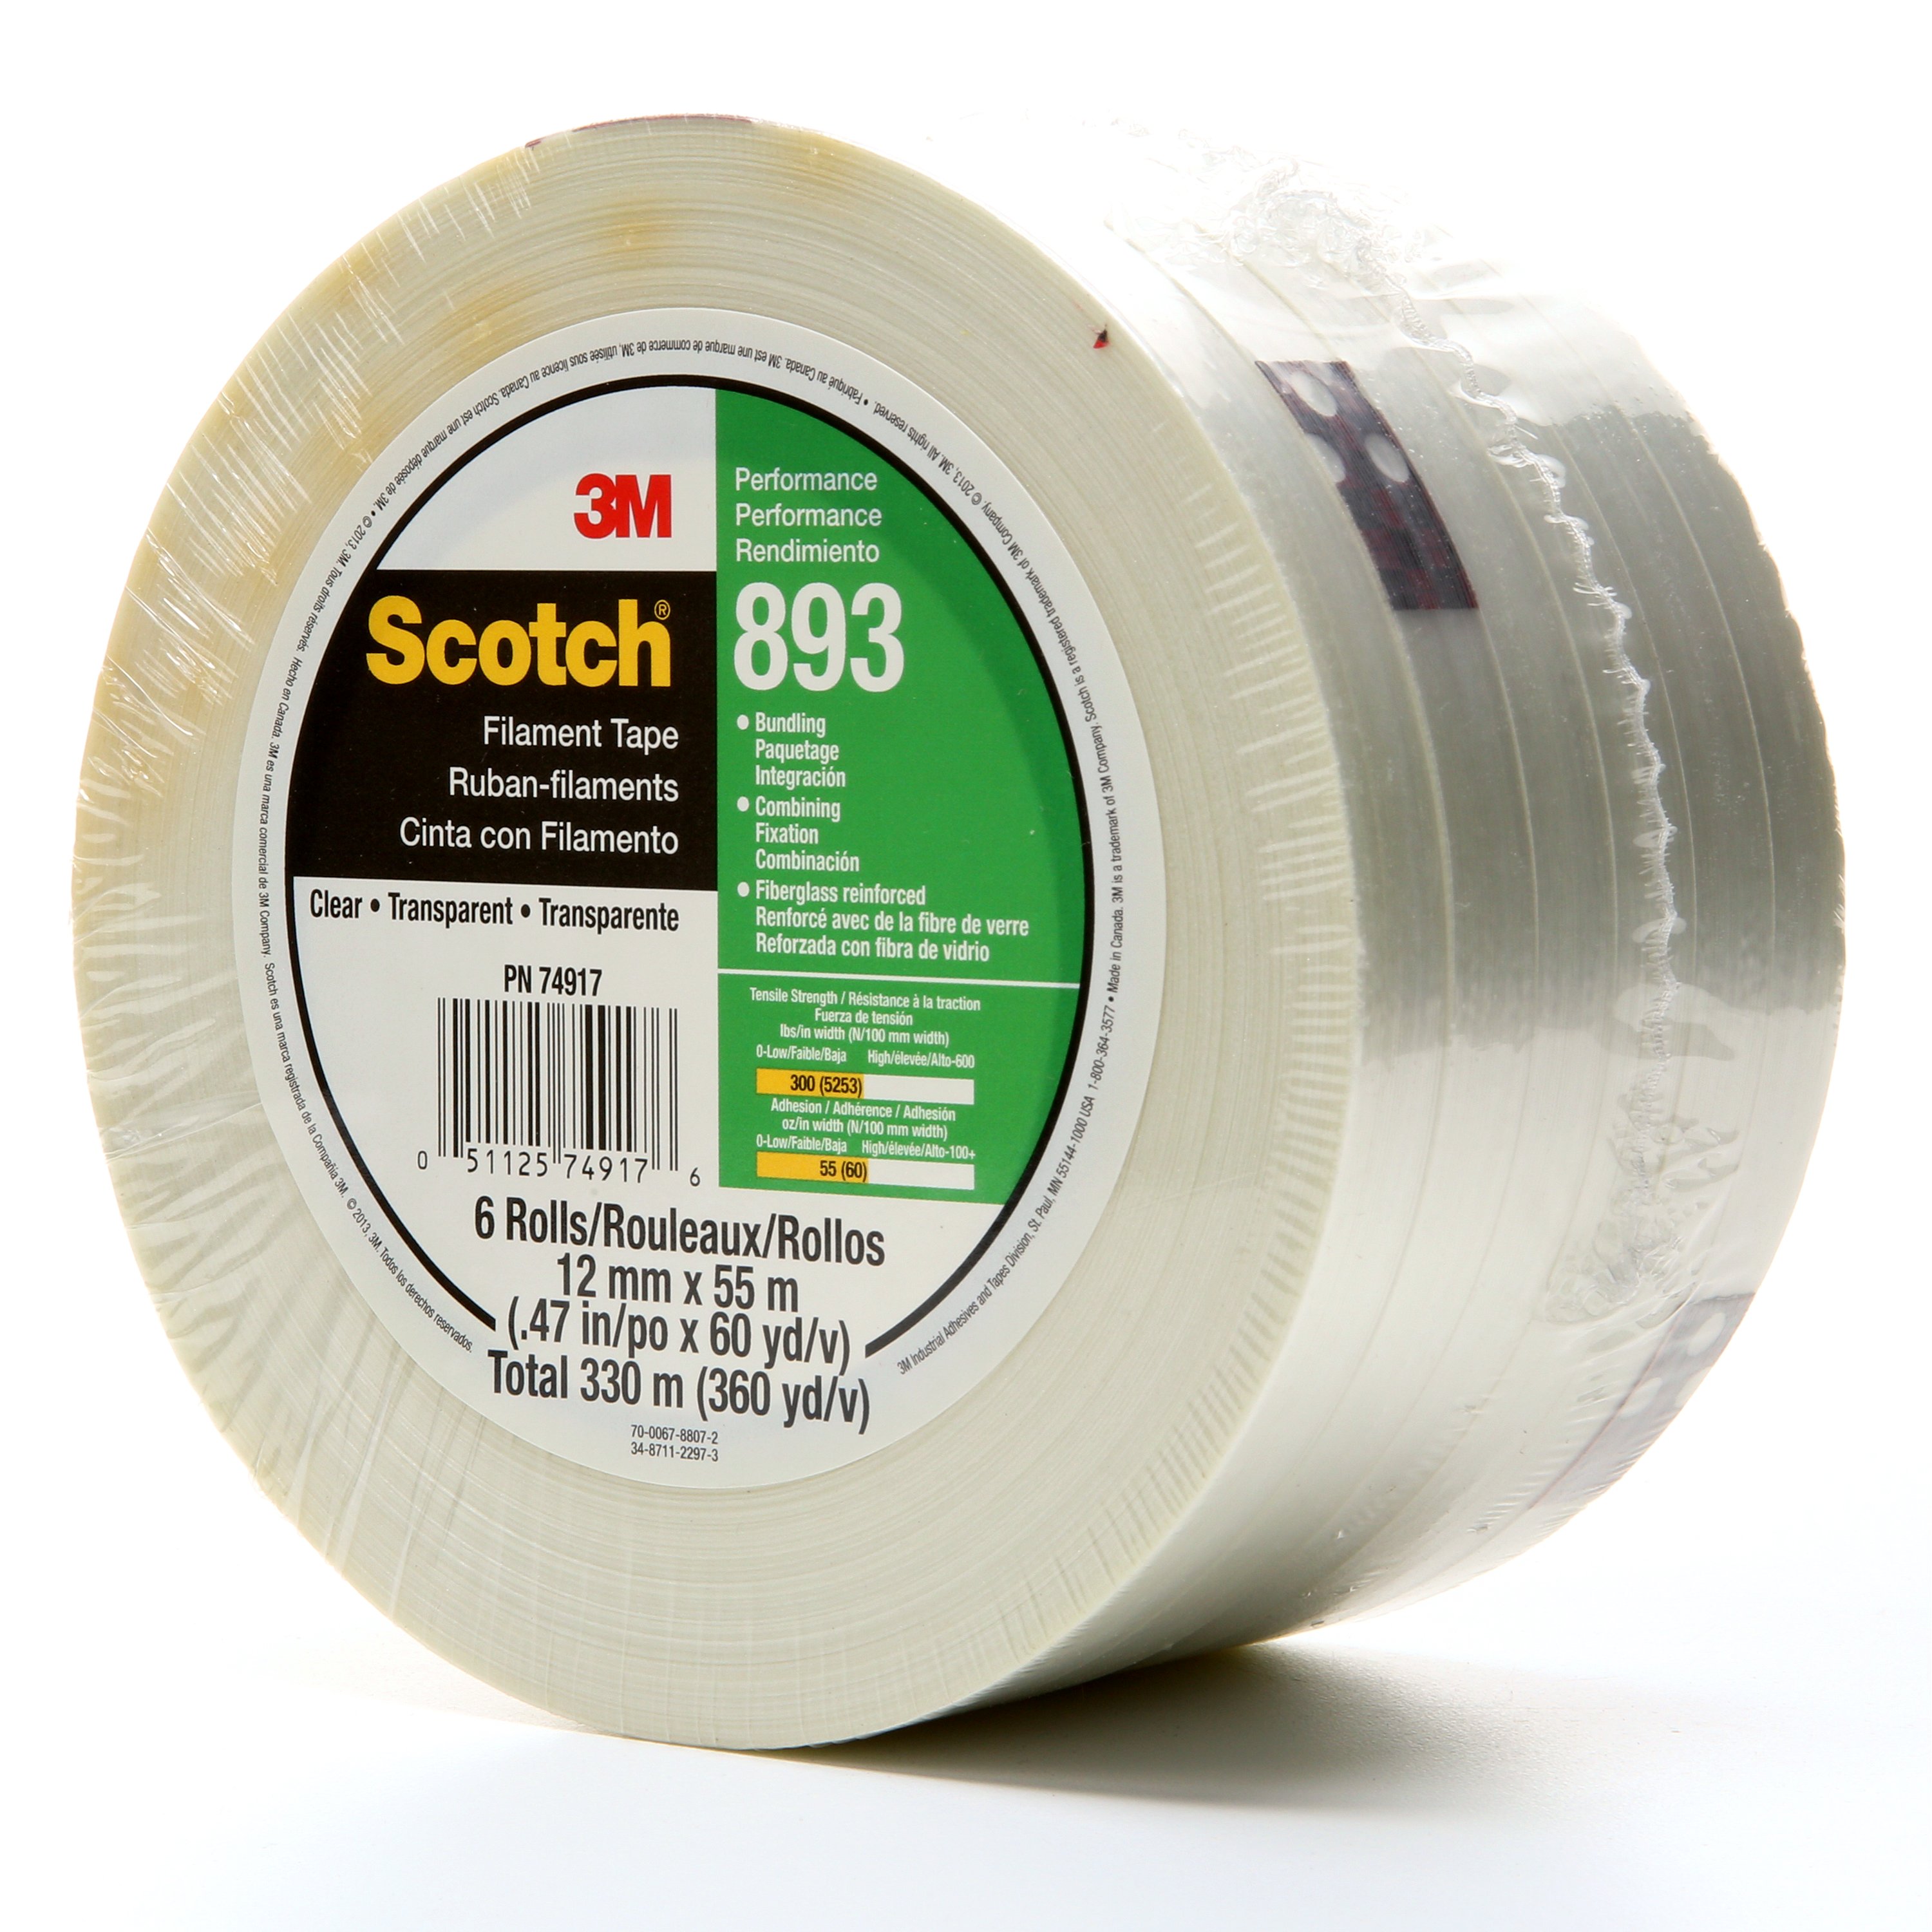 Scotch® Filament Tape 893 provides an excellent solution for metal splicing, rebar and pipe bundling or reinforcing large bulk containers.